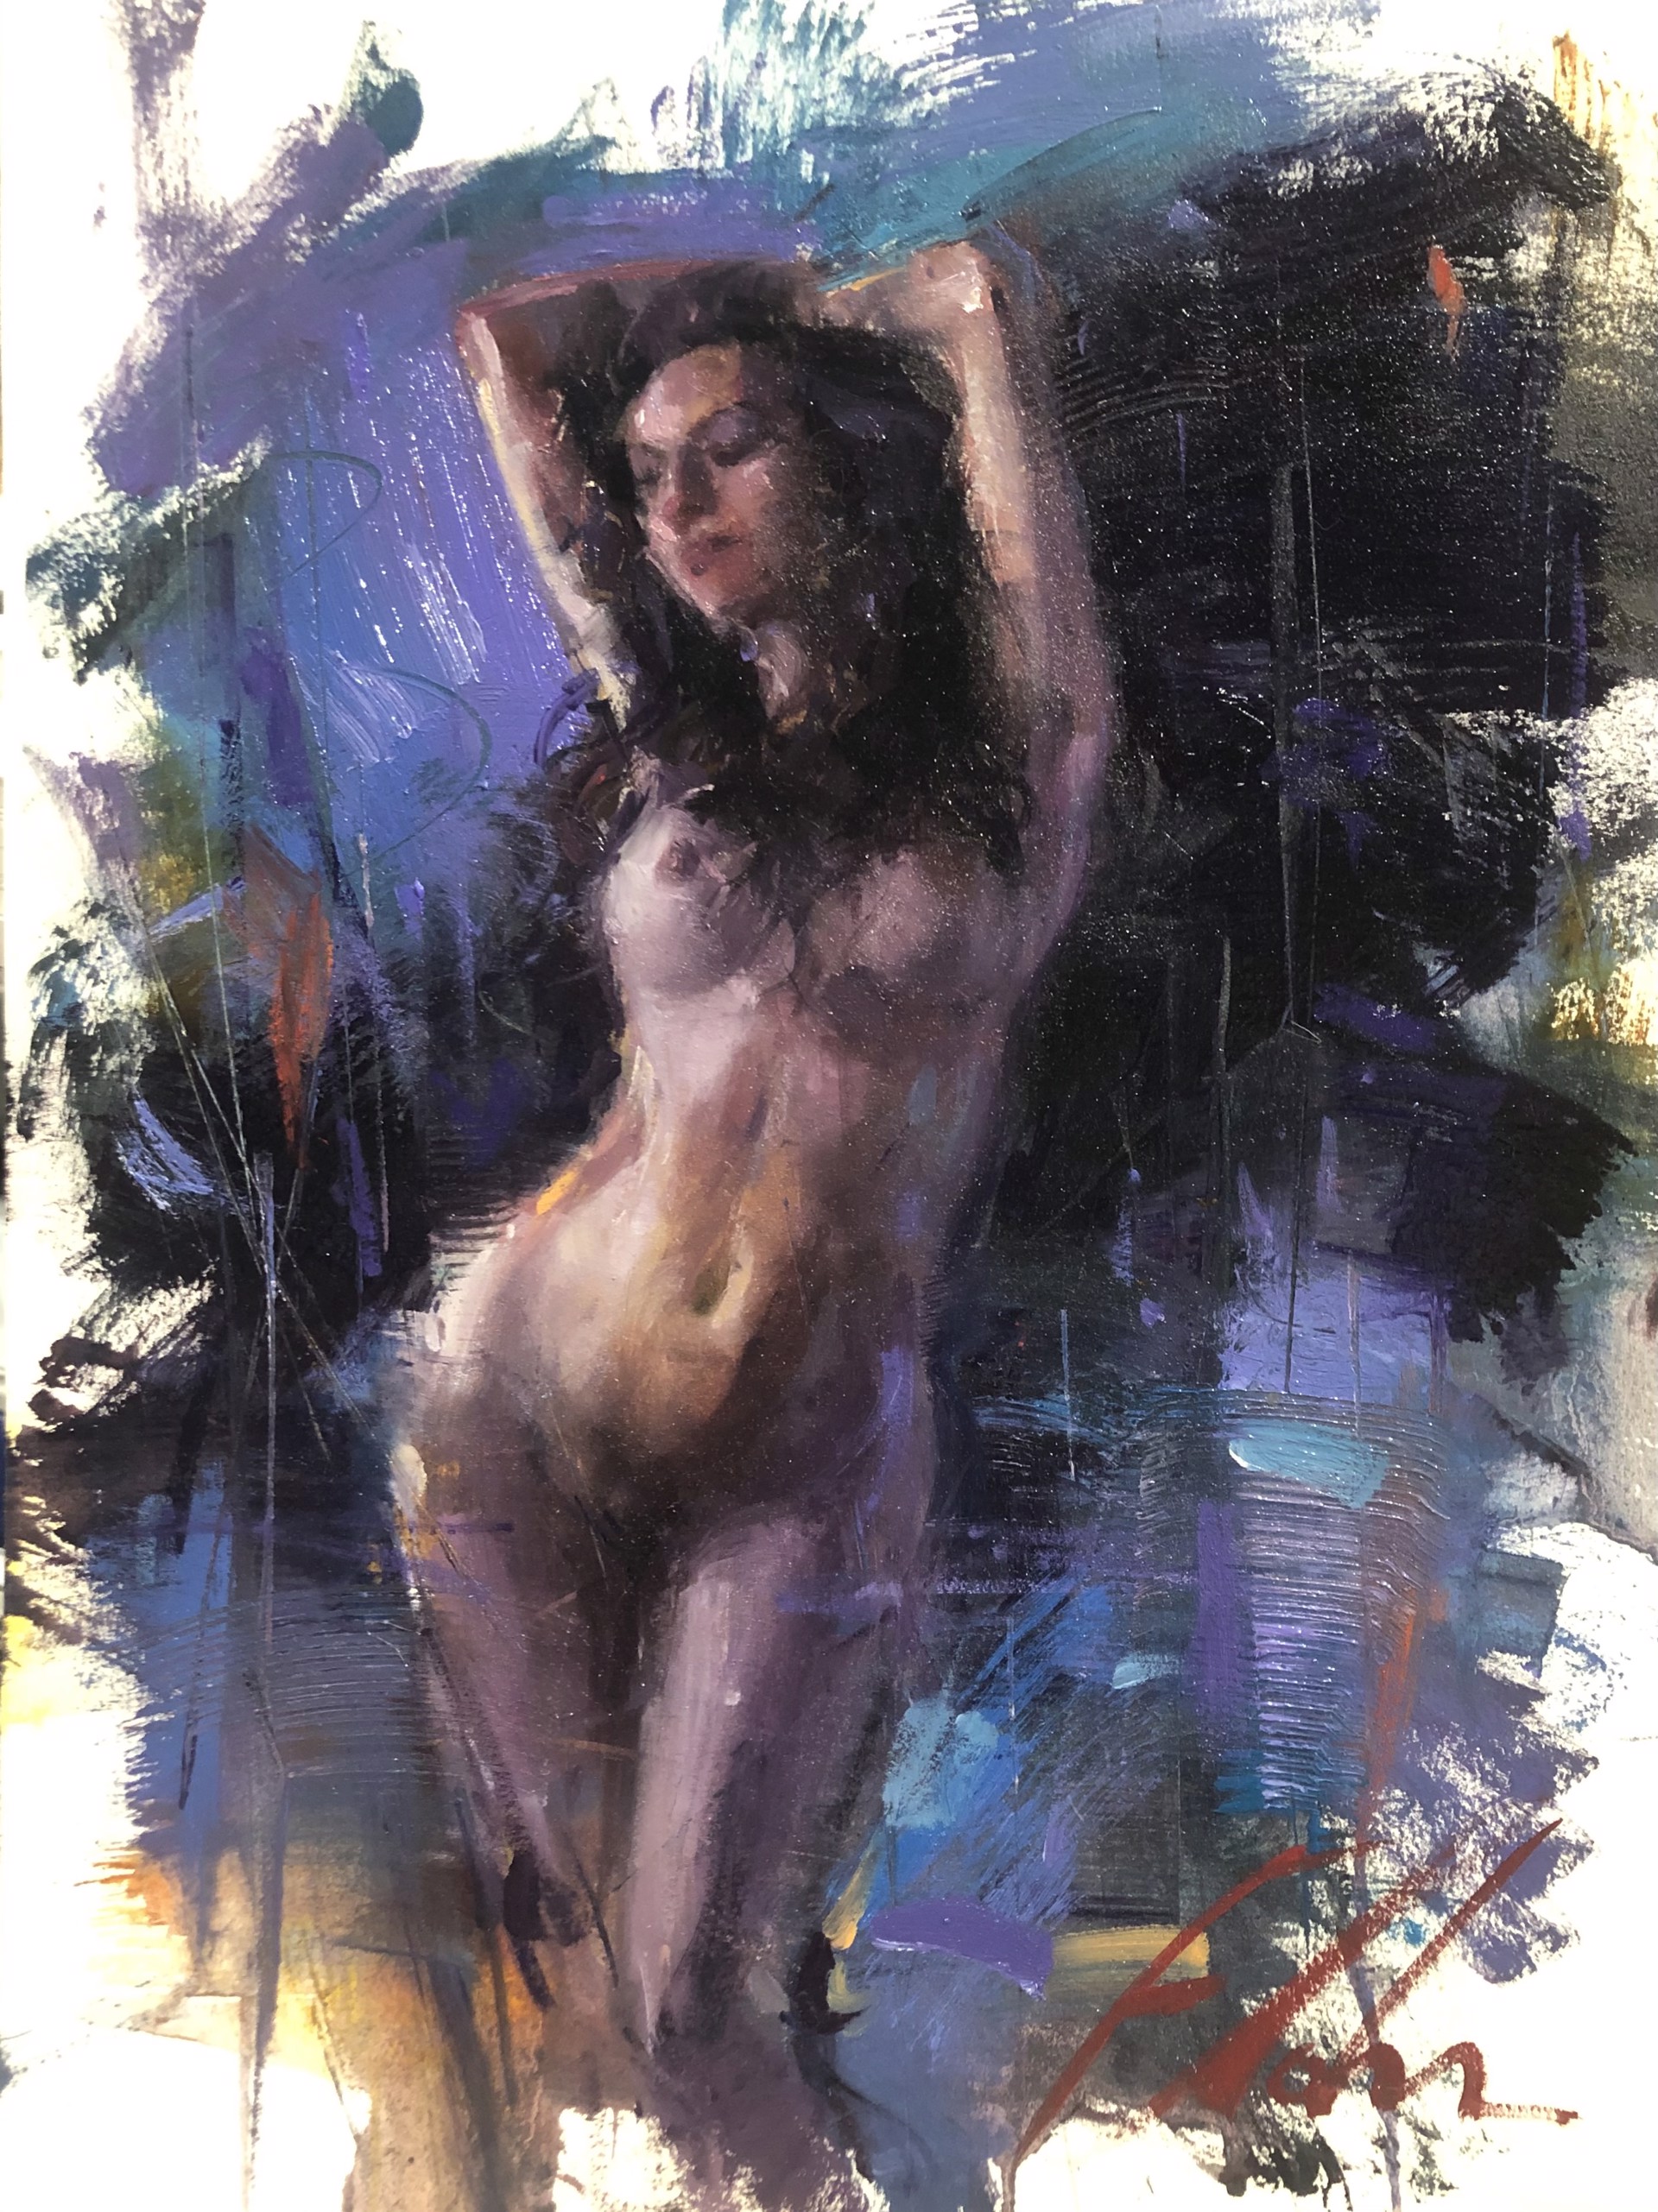 Beauty Unveiled by Michael Flohr